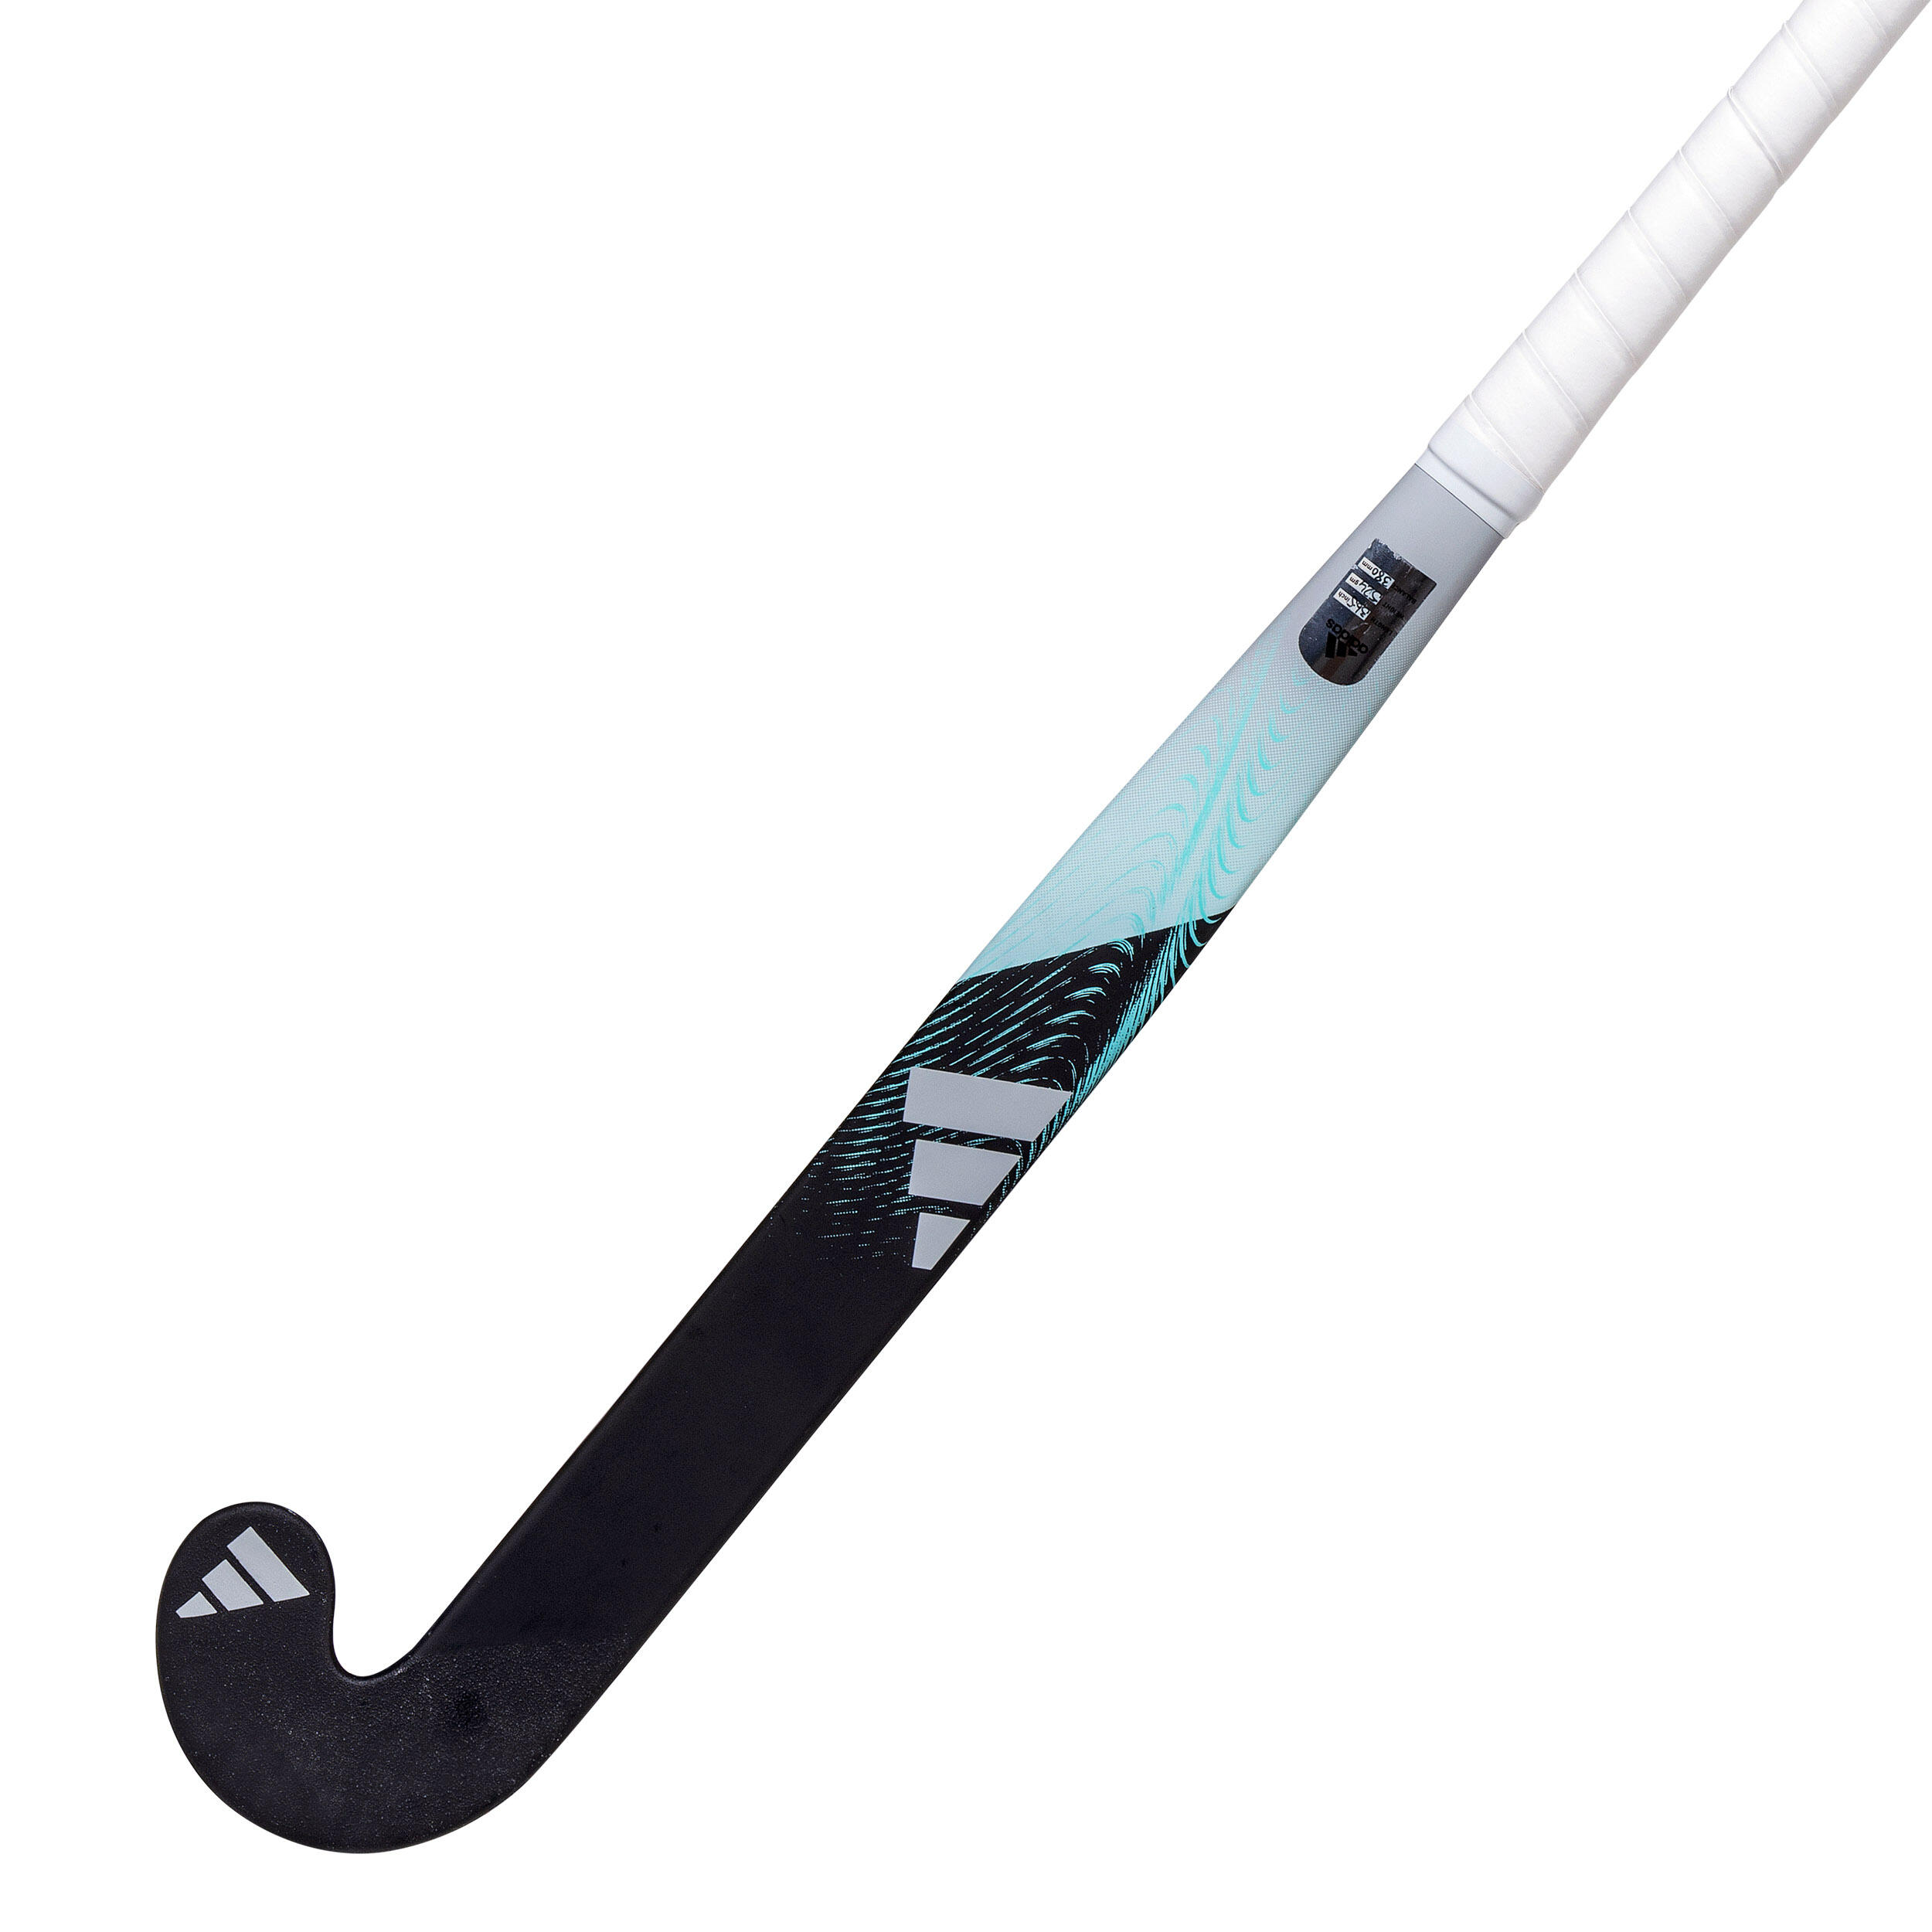 Adult Intermediate 20% Carbon Mid Bow Field Hockey Stick Fabela .7 - Black/Turquoise 4/12